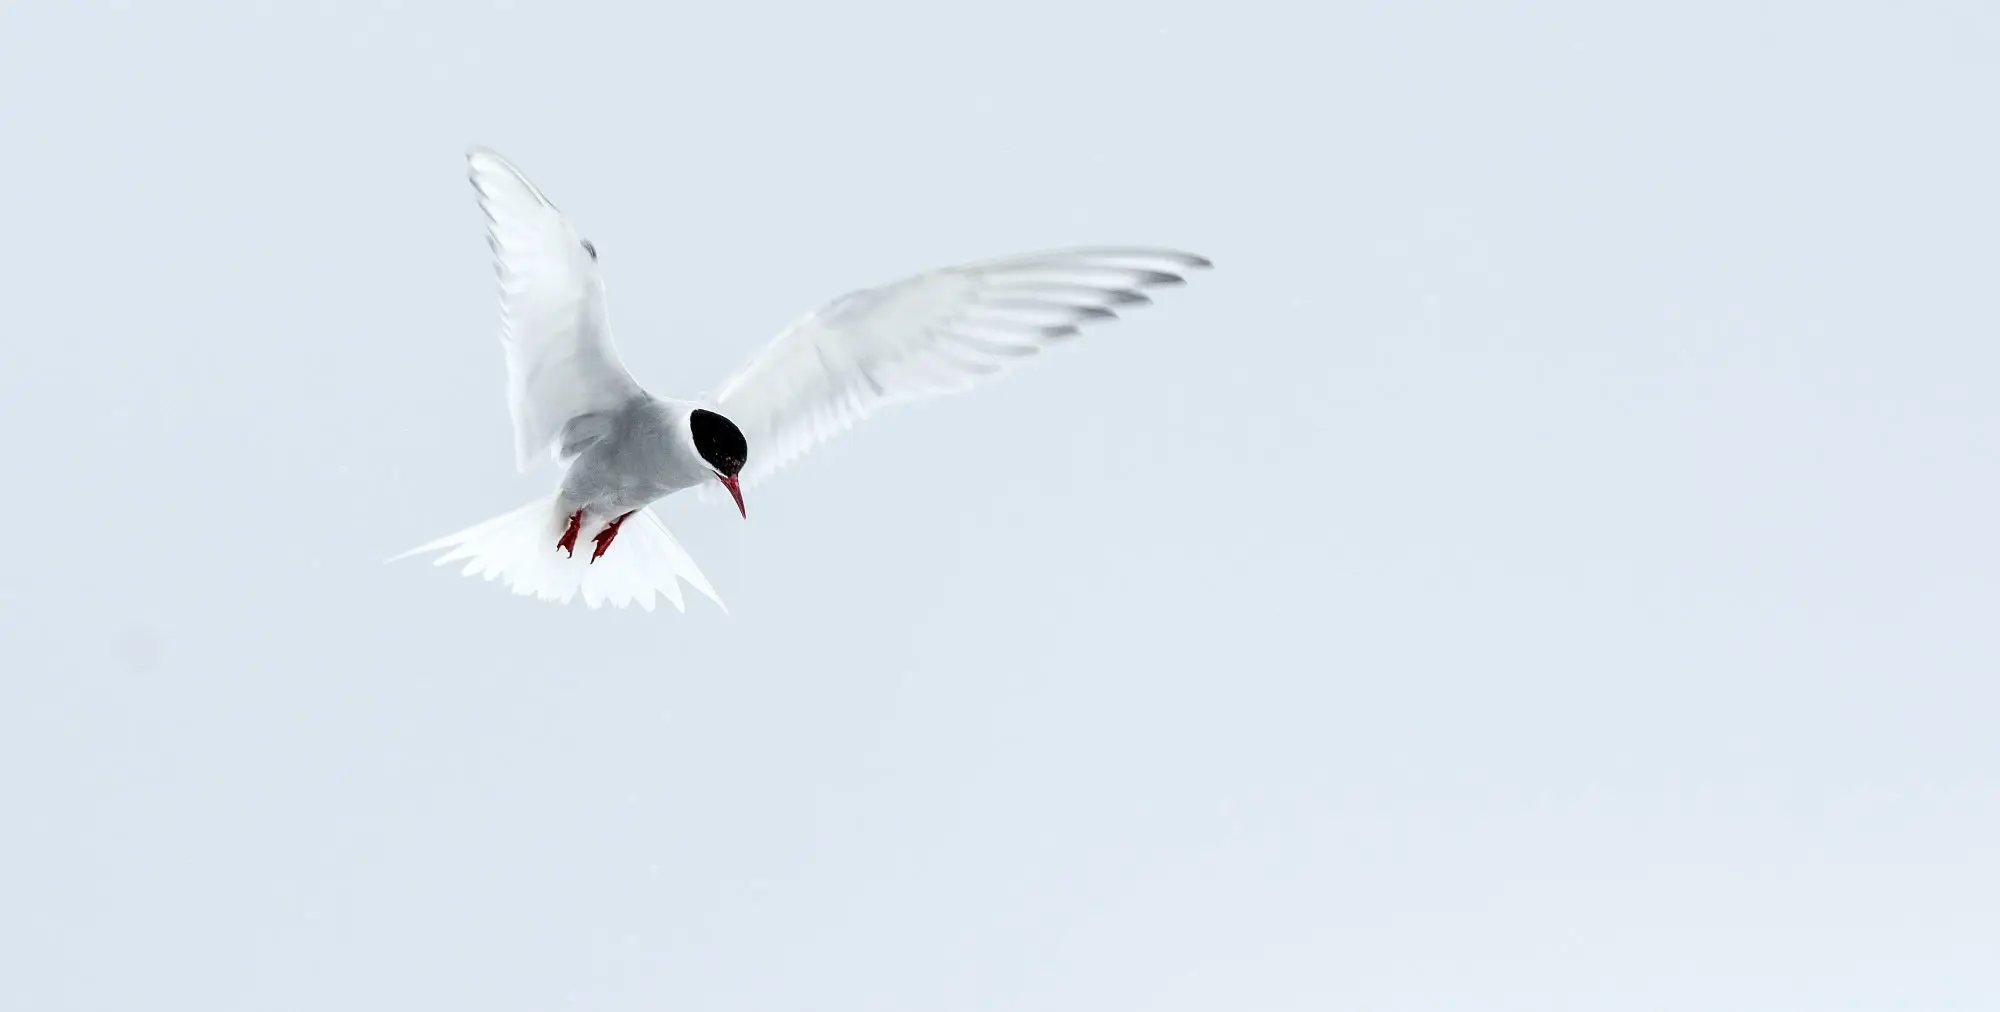 Arctic tern in flight with wings spread and looking down